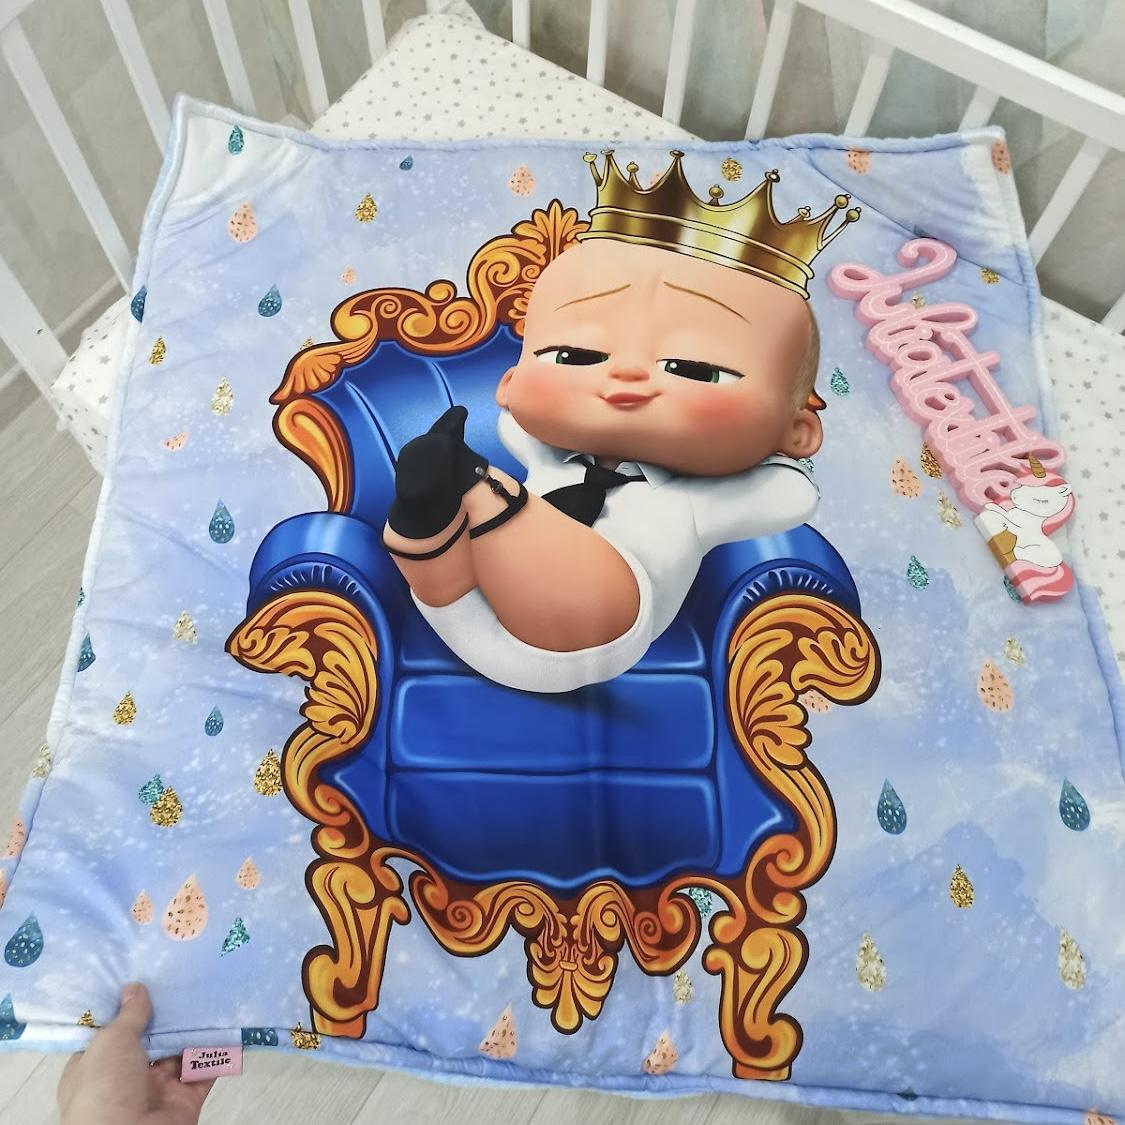 Reversible blanket with baby boss print